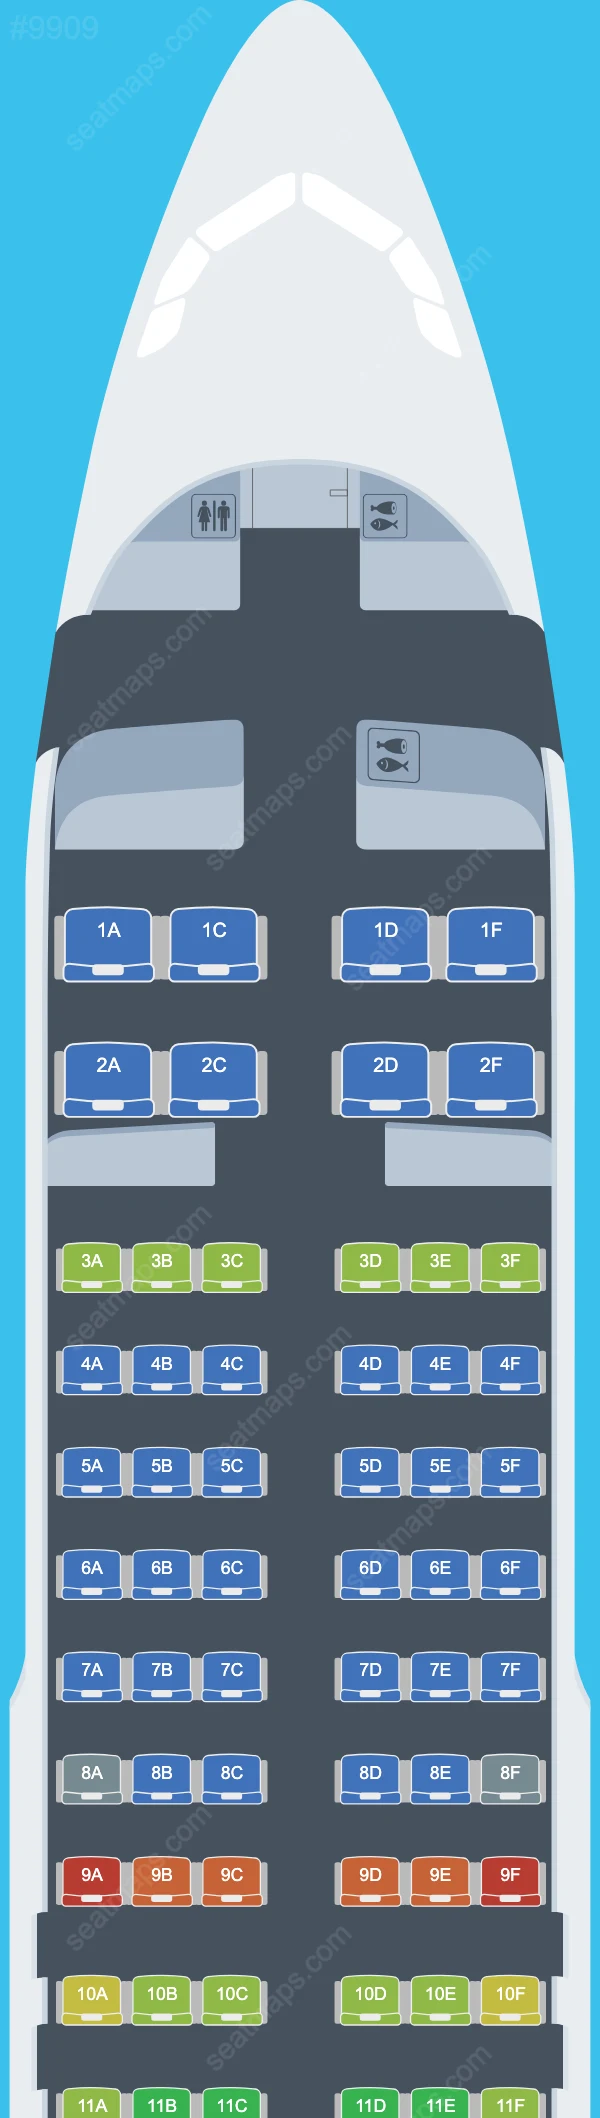 LongJiang Airlines Airbus A320 Seat Maps A320-200 V.1